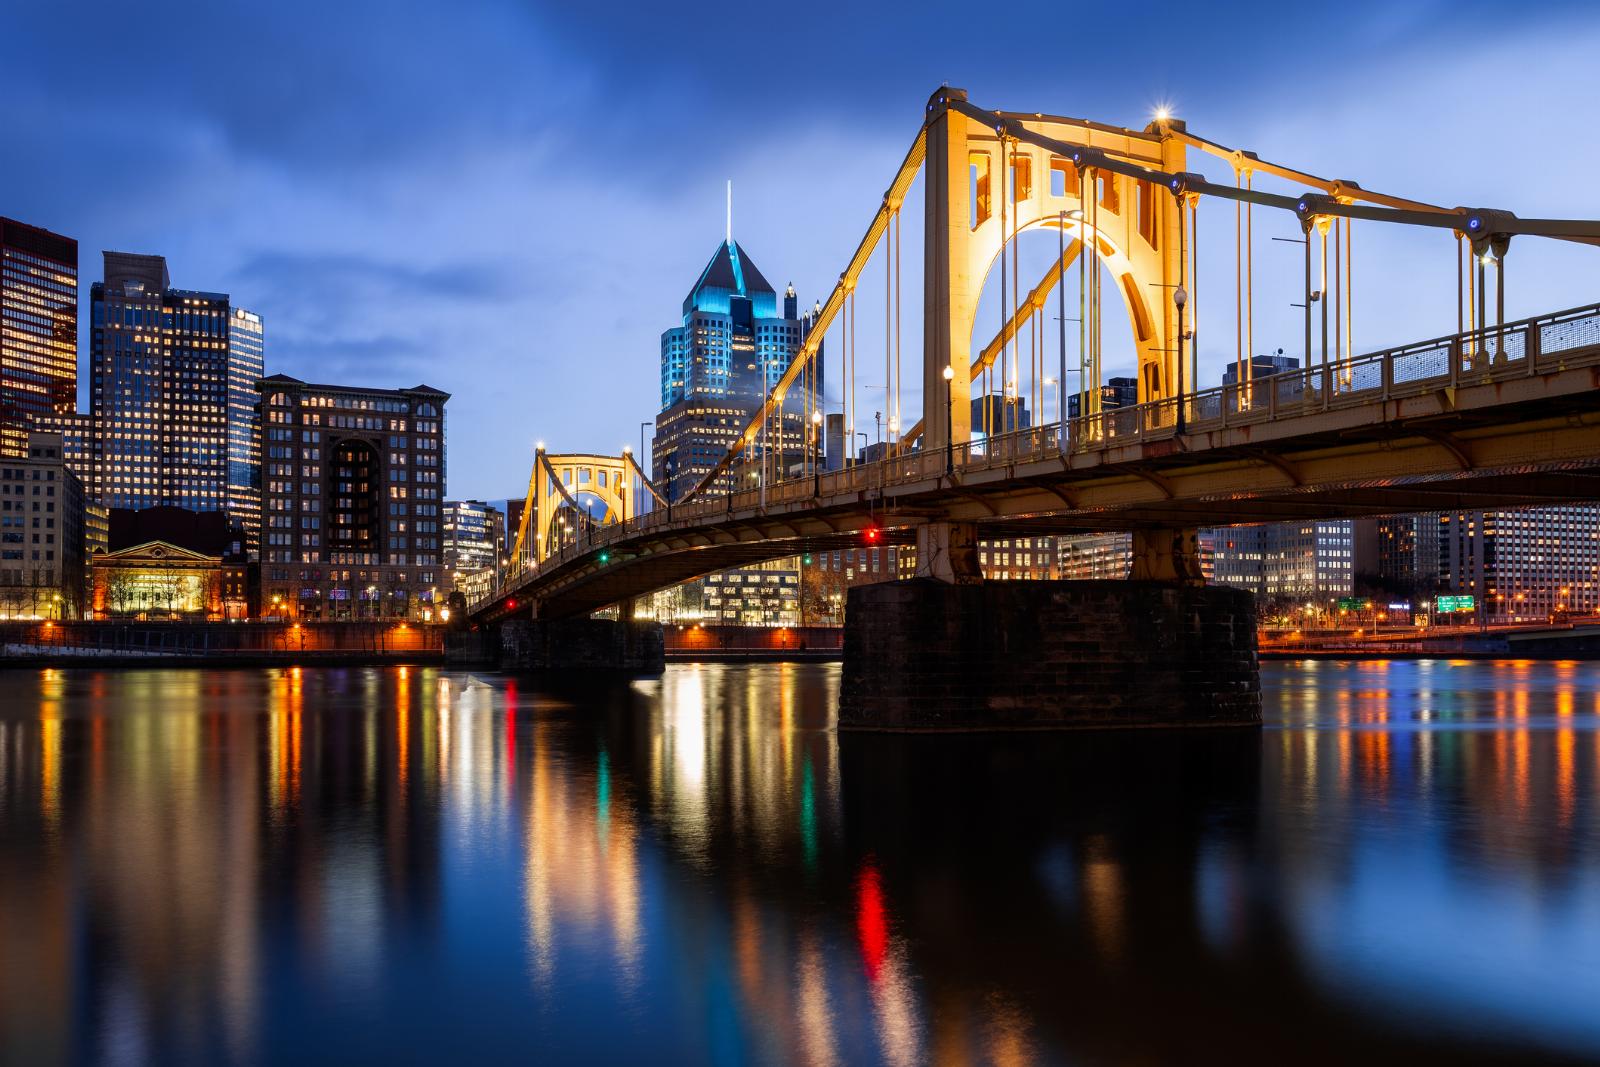 Pittsburgh’s AI expertise may give rise to an already growing startup market